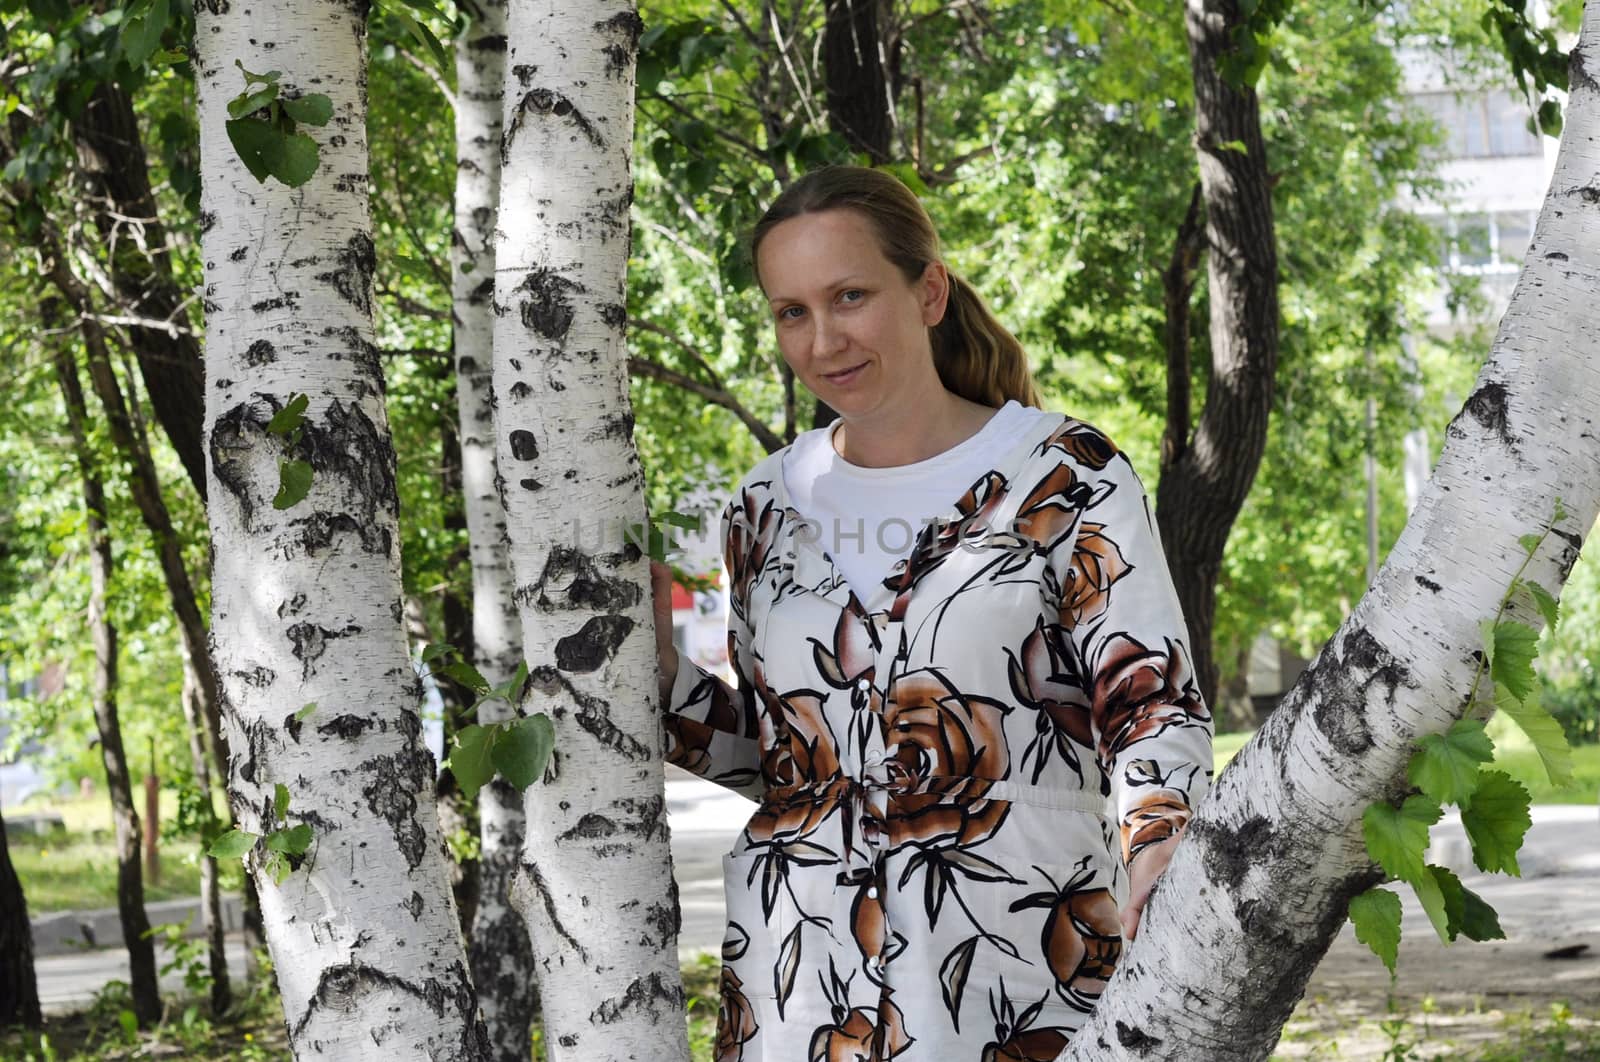 The happy woman stands near birches in park